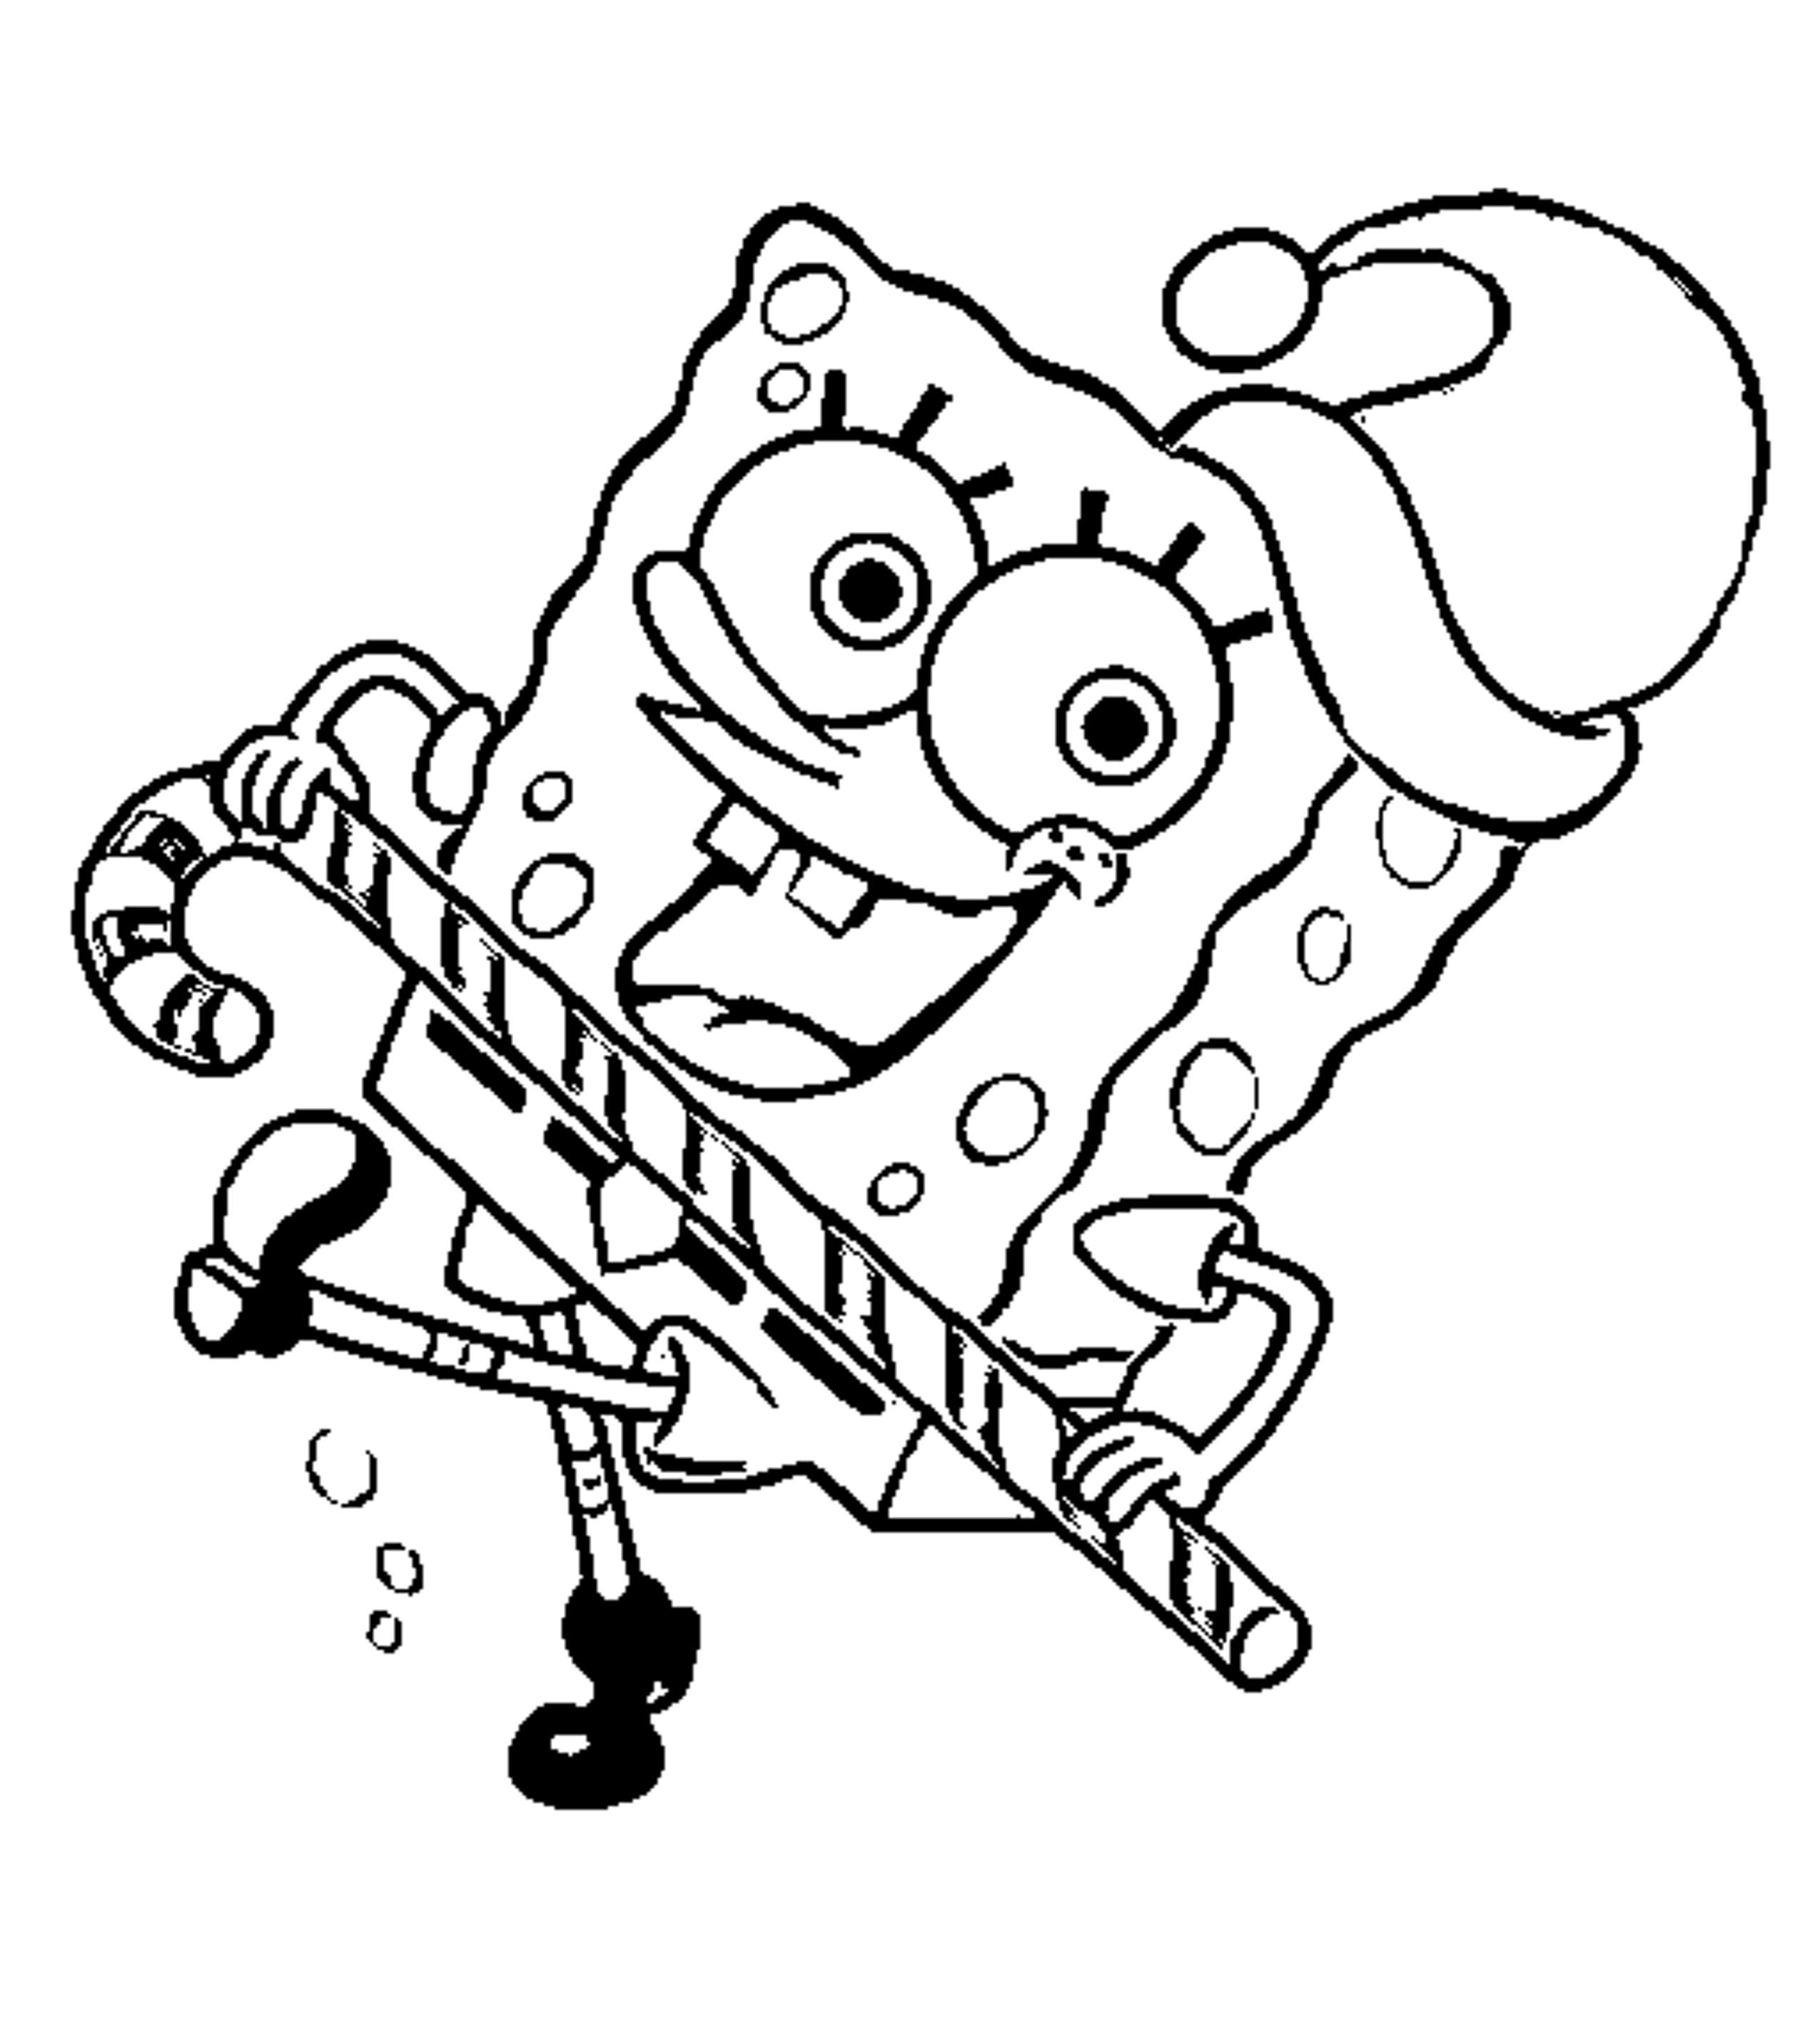 Patrick Spongebob Color Page Cartoon Characters Coloring Pages ... -  Coloring Home